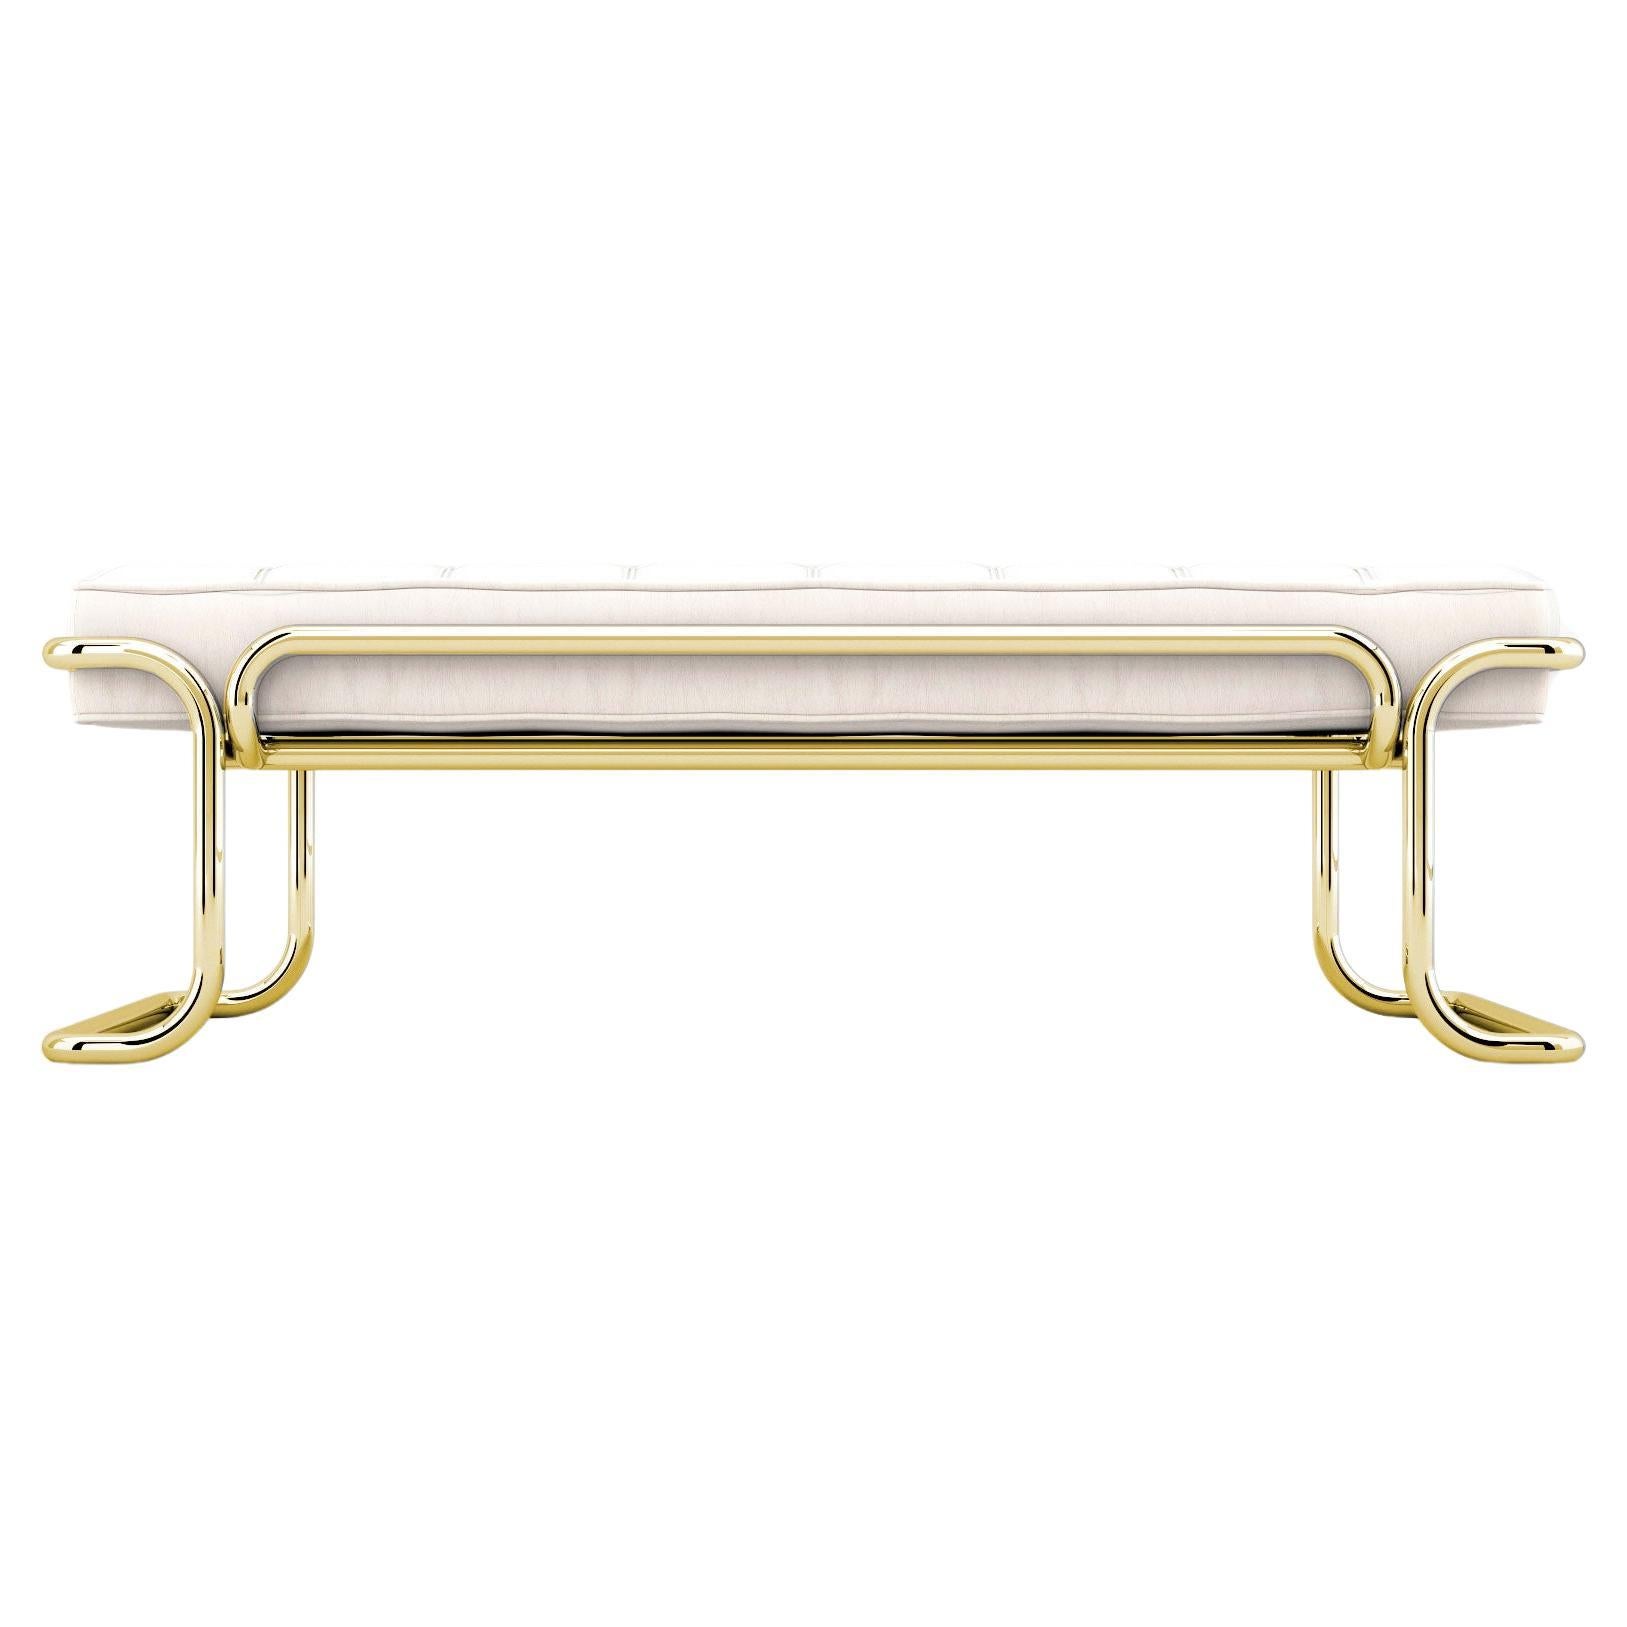 Lotus Banquette - Modern White Leather Sofa with Brass Legs For Sale